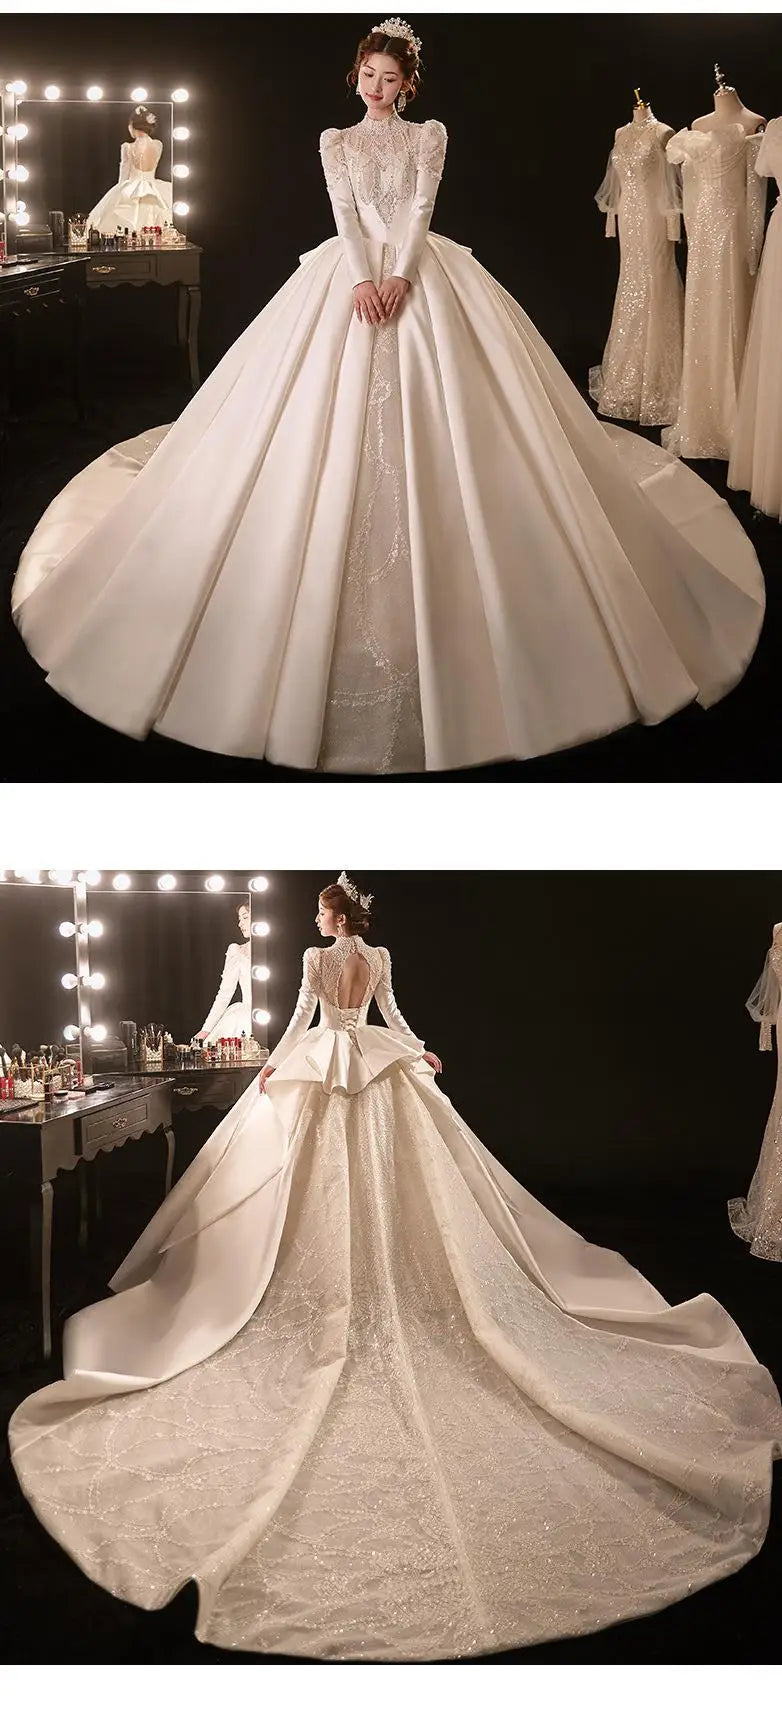 Exquisite Vintage Wedding Dress Long Sleeve Lace Up Floor-length Beading Bridal Gown